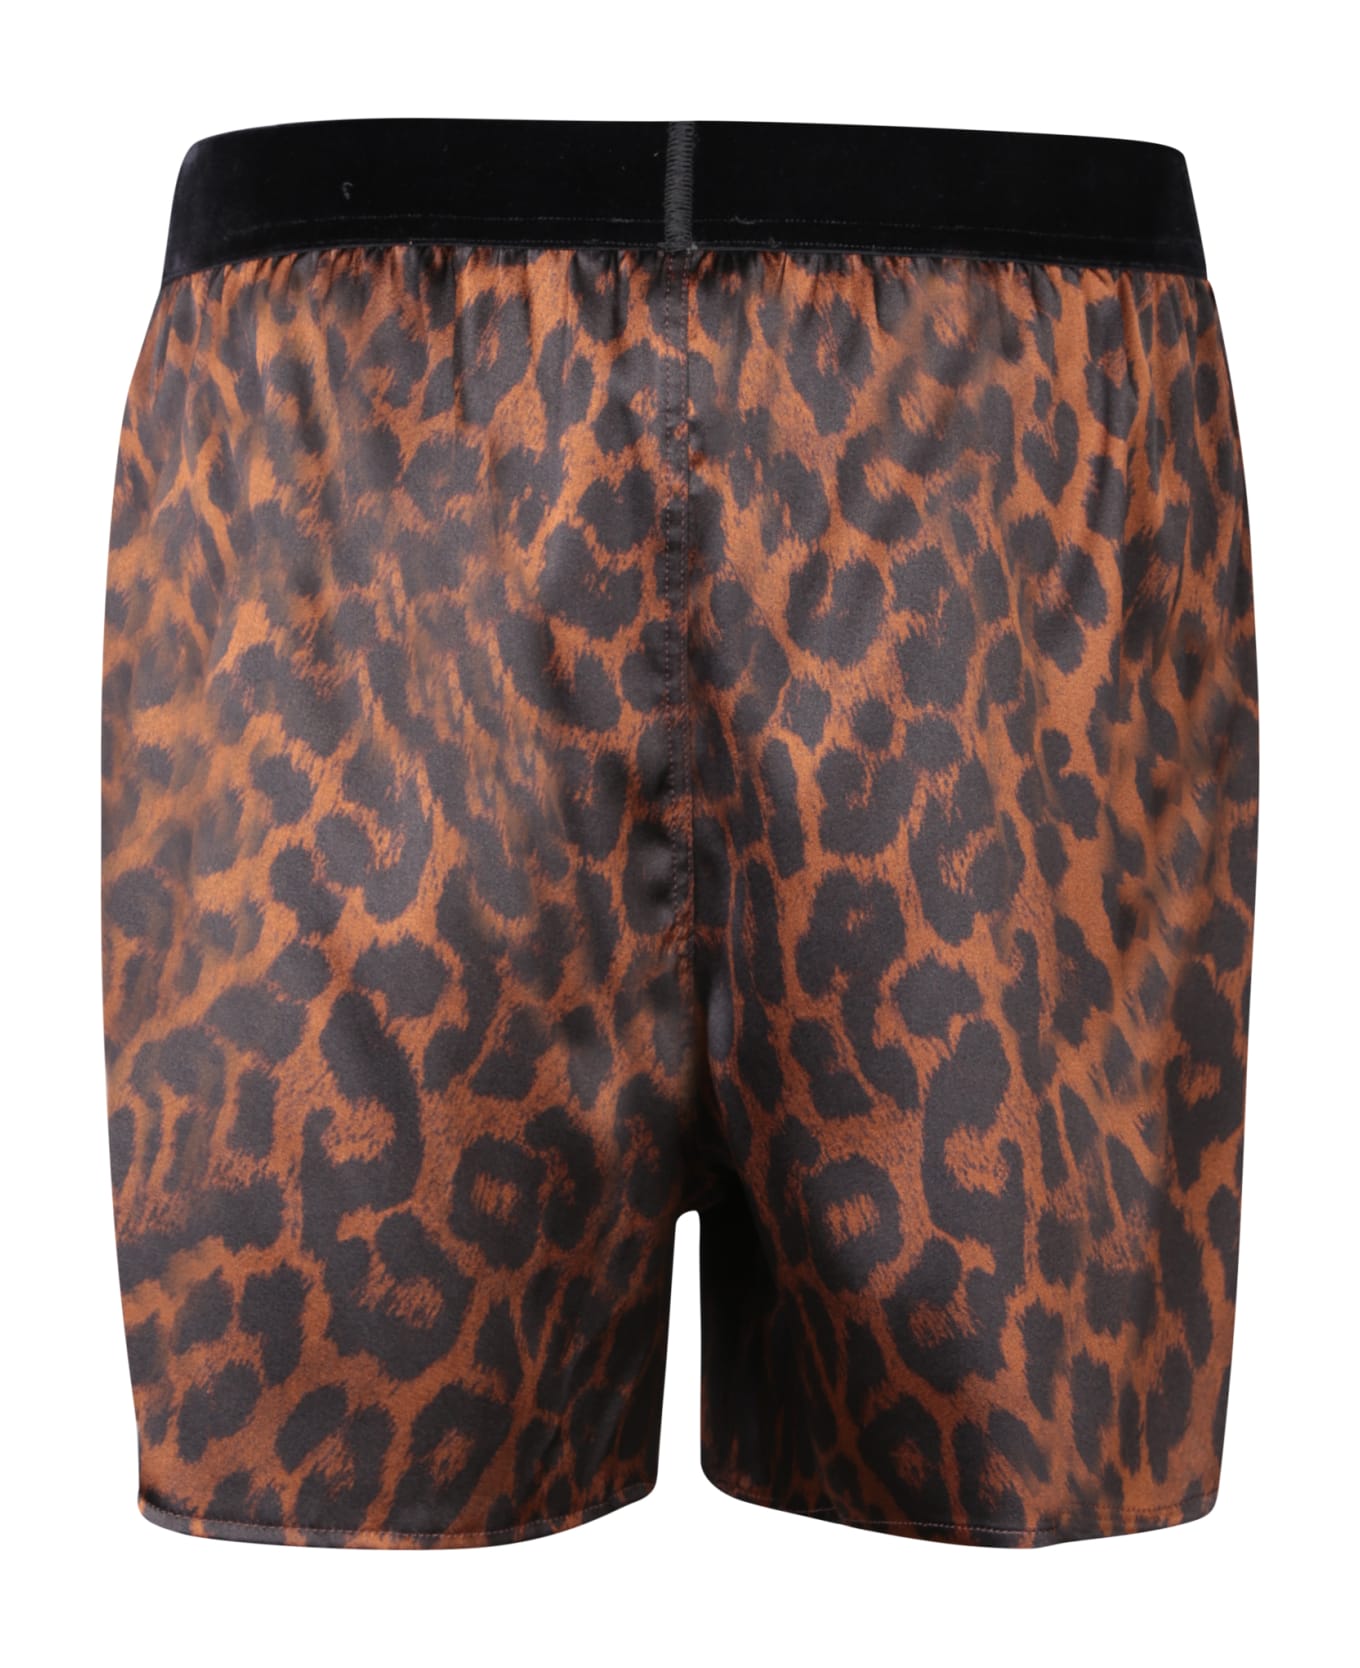 Tom Ford Boxer Shorts - LEOPARD